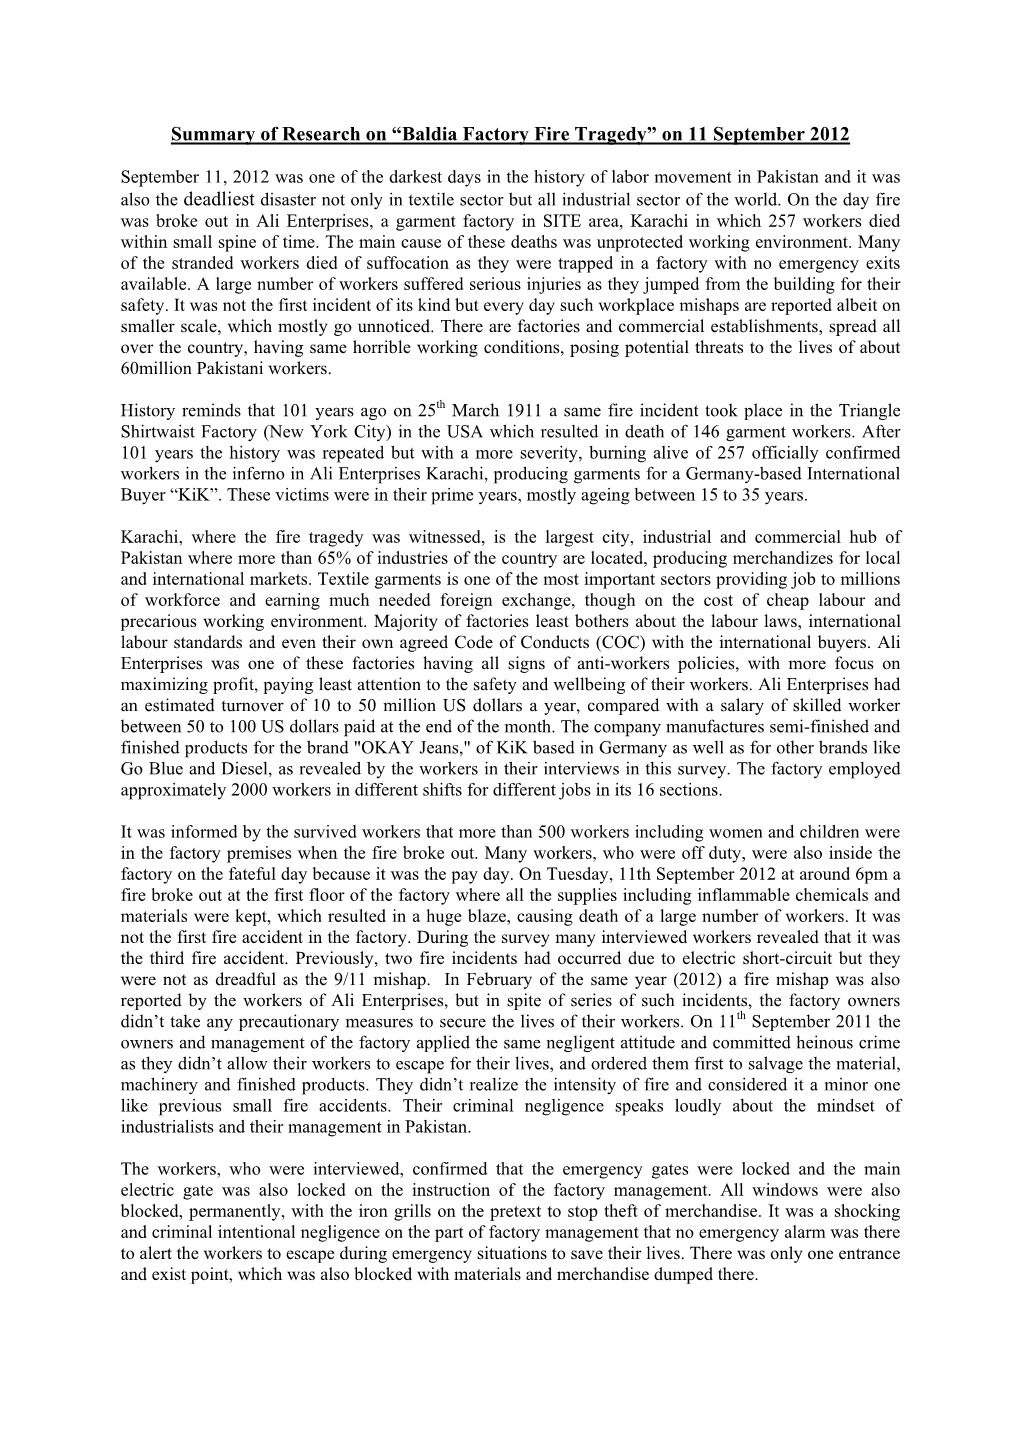 Summary of Research on “Baldia Factory Fire Tragedy” on 11 September 2012